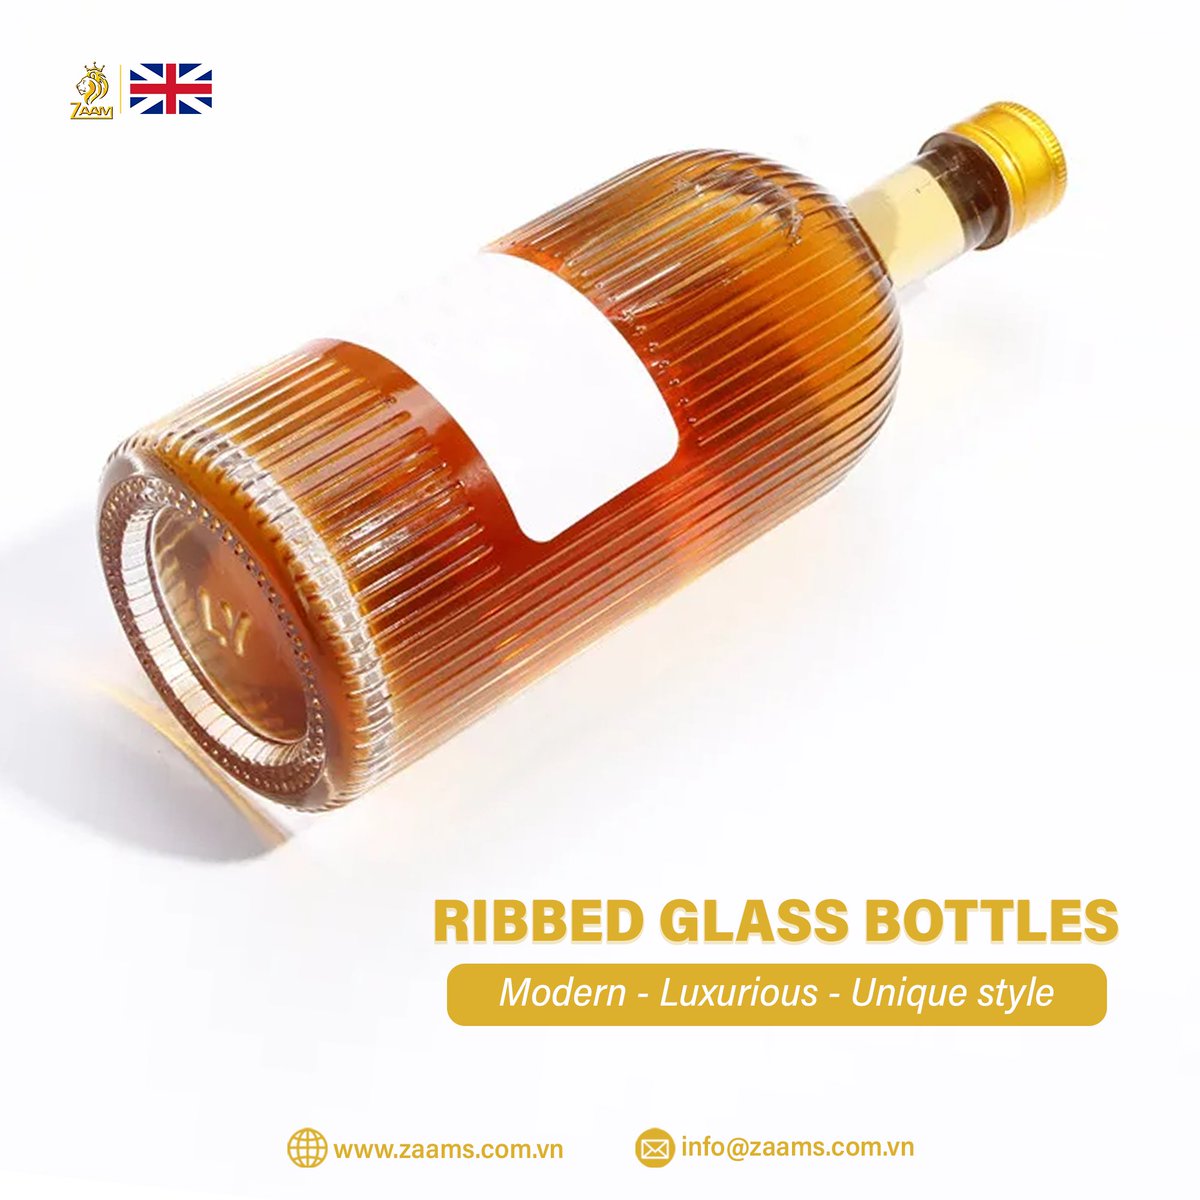 ⚡️DISCOVER THE LATEST TREND: RIBBED GLASS BOTTLES! Contact us today to discuss your unique packaging needs. 
📷zaams.com.vn 
#zaam #versatileelegance #glasscraft #glassartistry #SleekDesign #glassbottle #glasspackaging #glassjar #glassjarsupplier #packaging #bottle